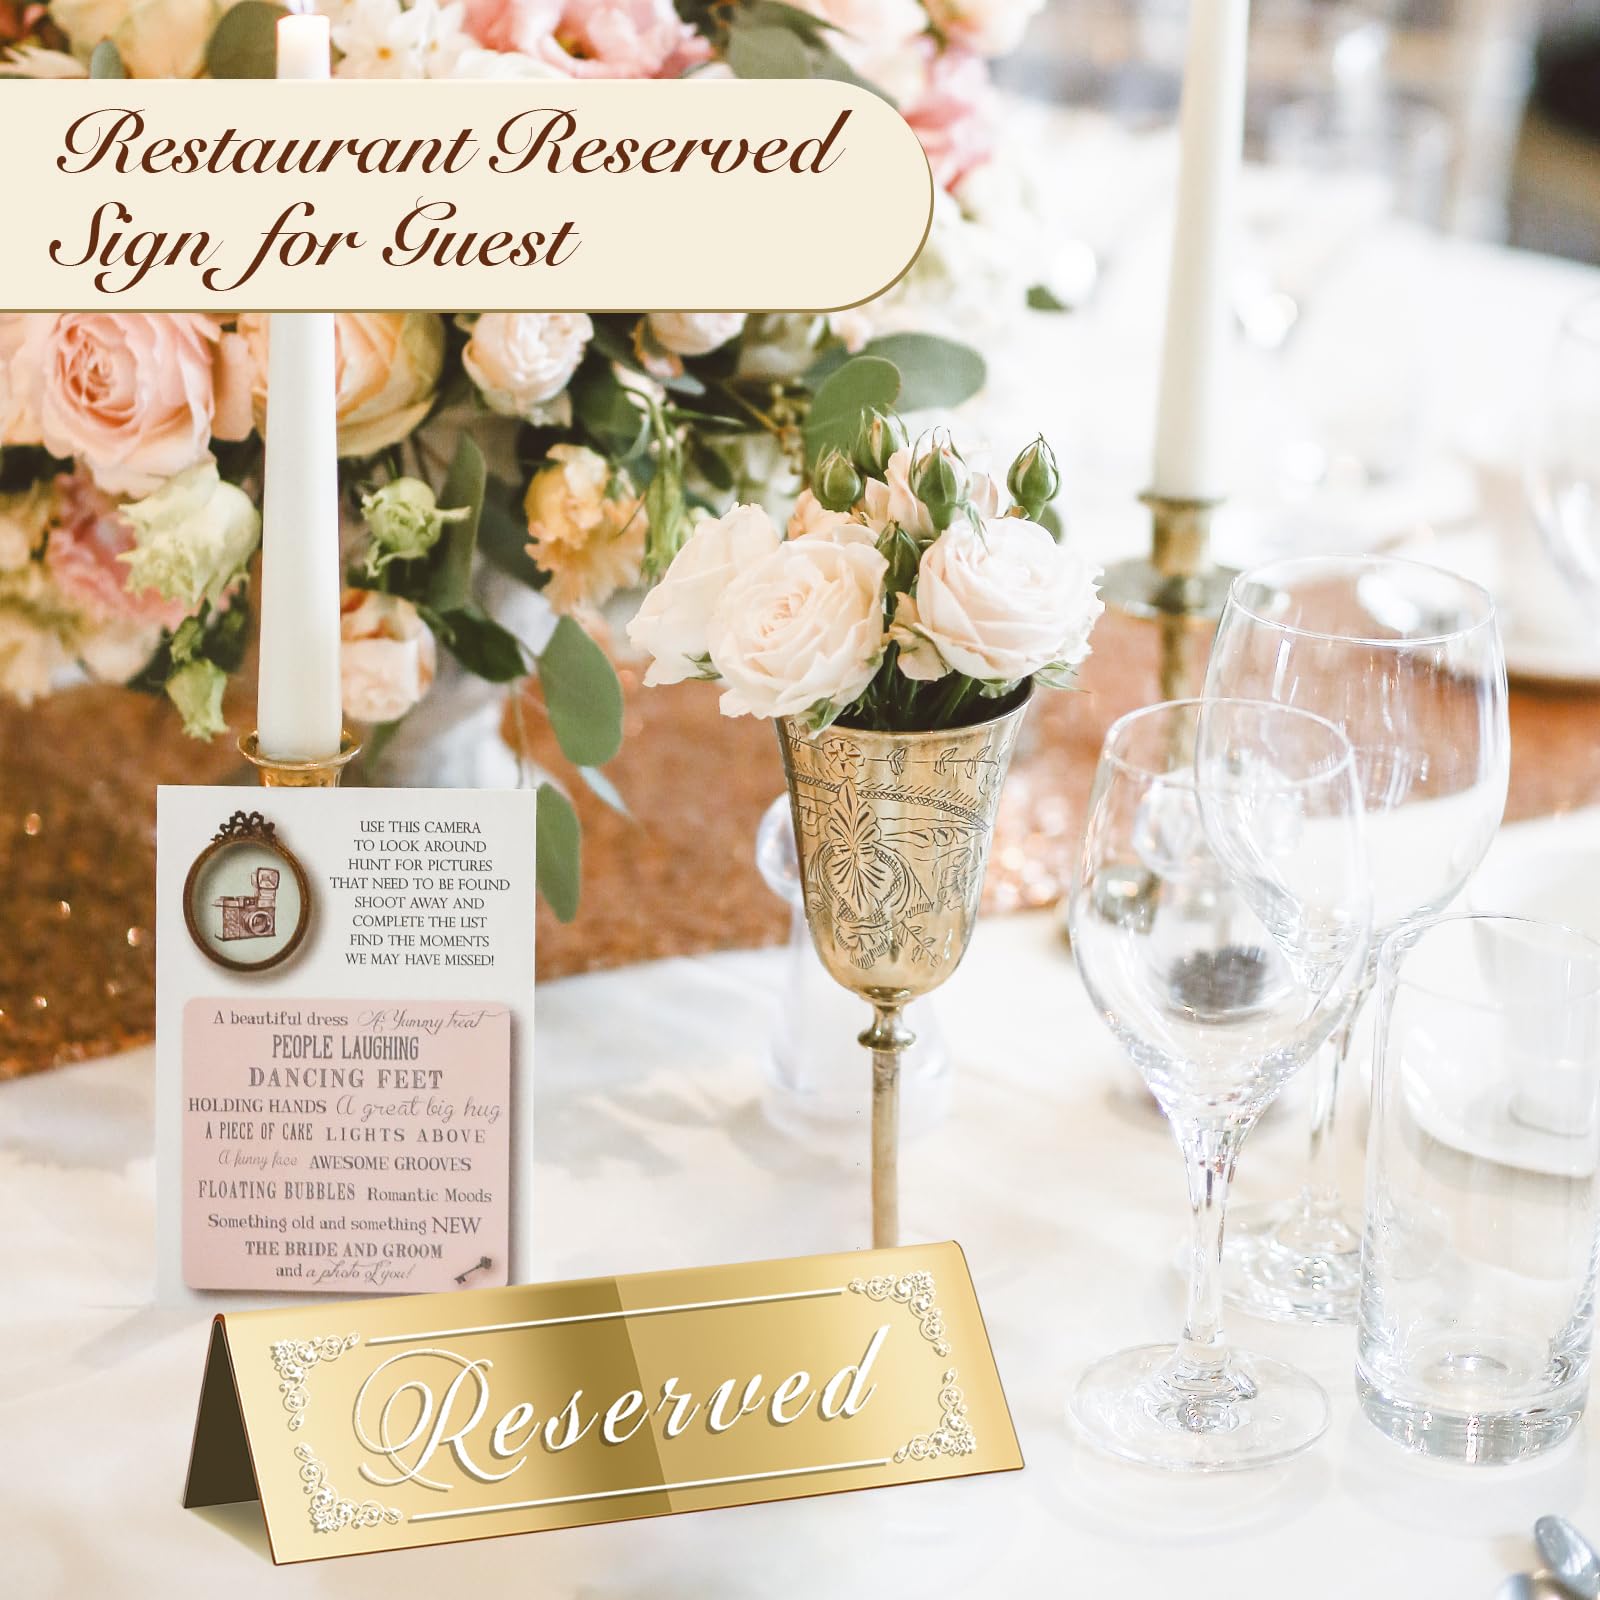 CWJCYTNSN 12PCS Reserved Table Signs, Gold Reserved Signs for Wedding, Acrylic Double-side Reserved Seating Signs, Mirrored Guest Reservation Table Tent Signs for Birthday Party, Event, Restaurant